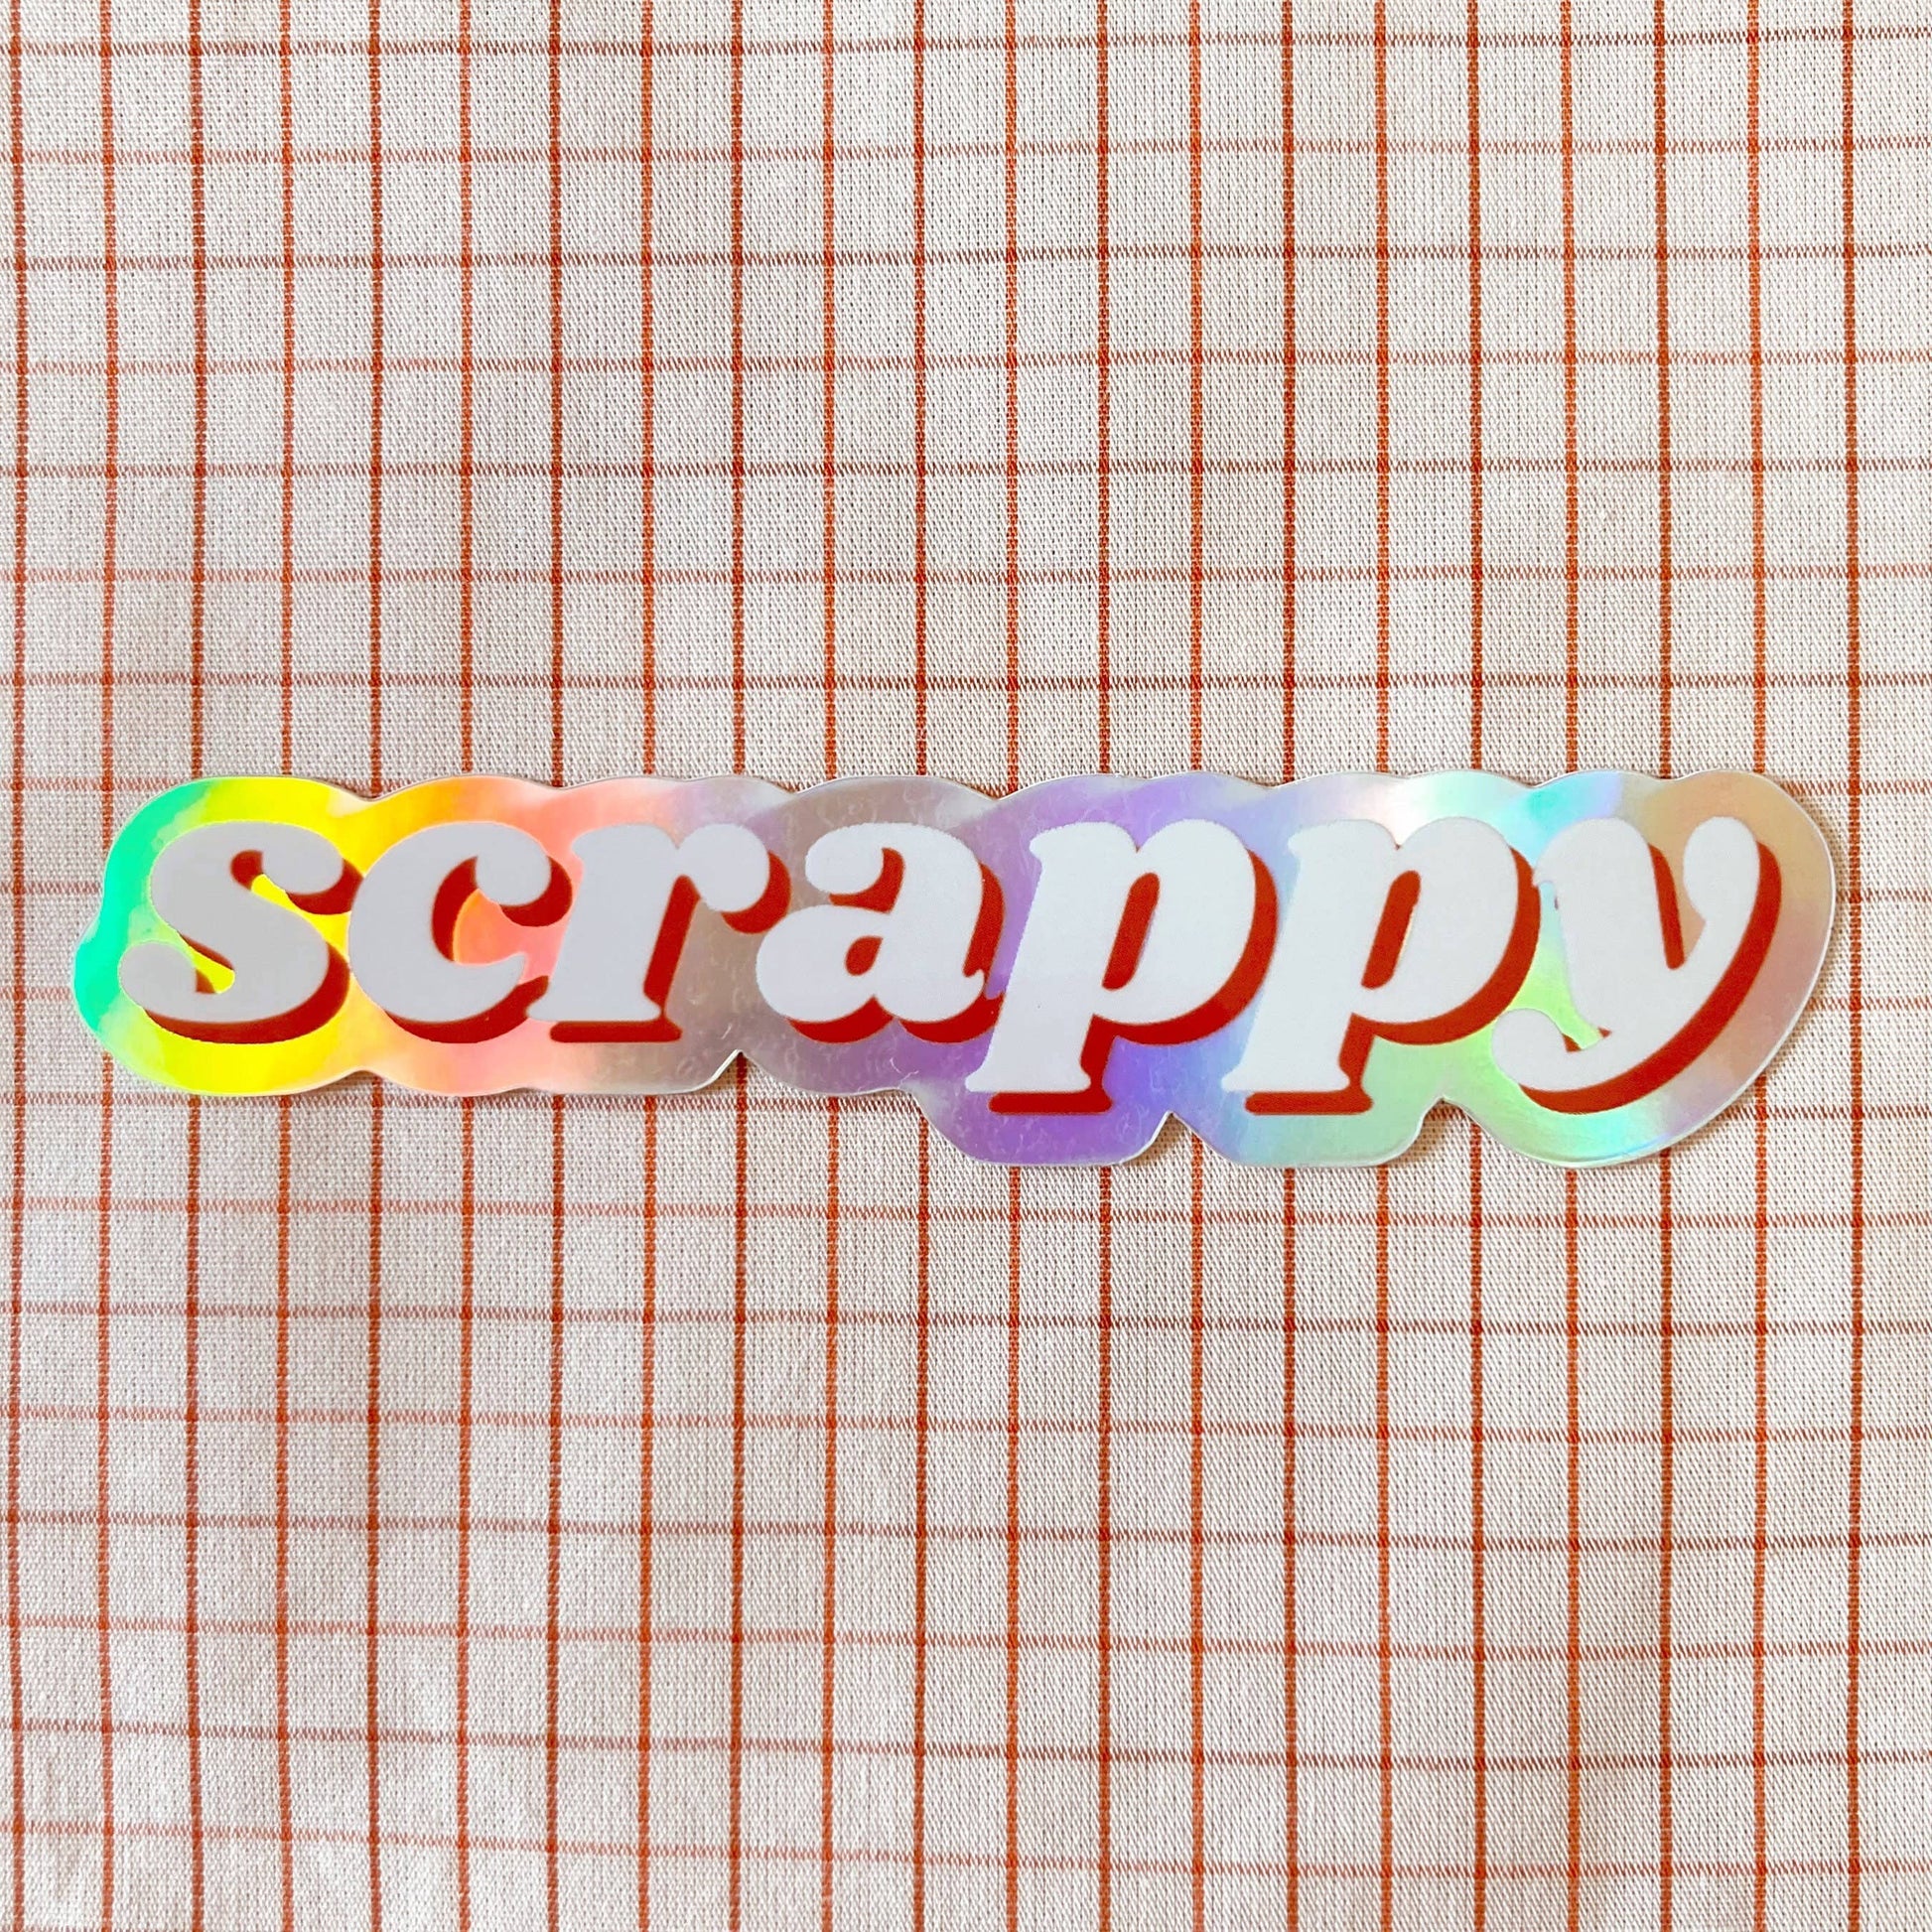 Scrappy Holographic Sewing And Quilting Vinyl Sticker - homesewn